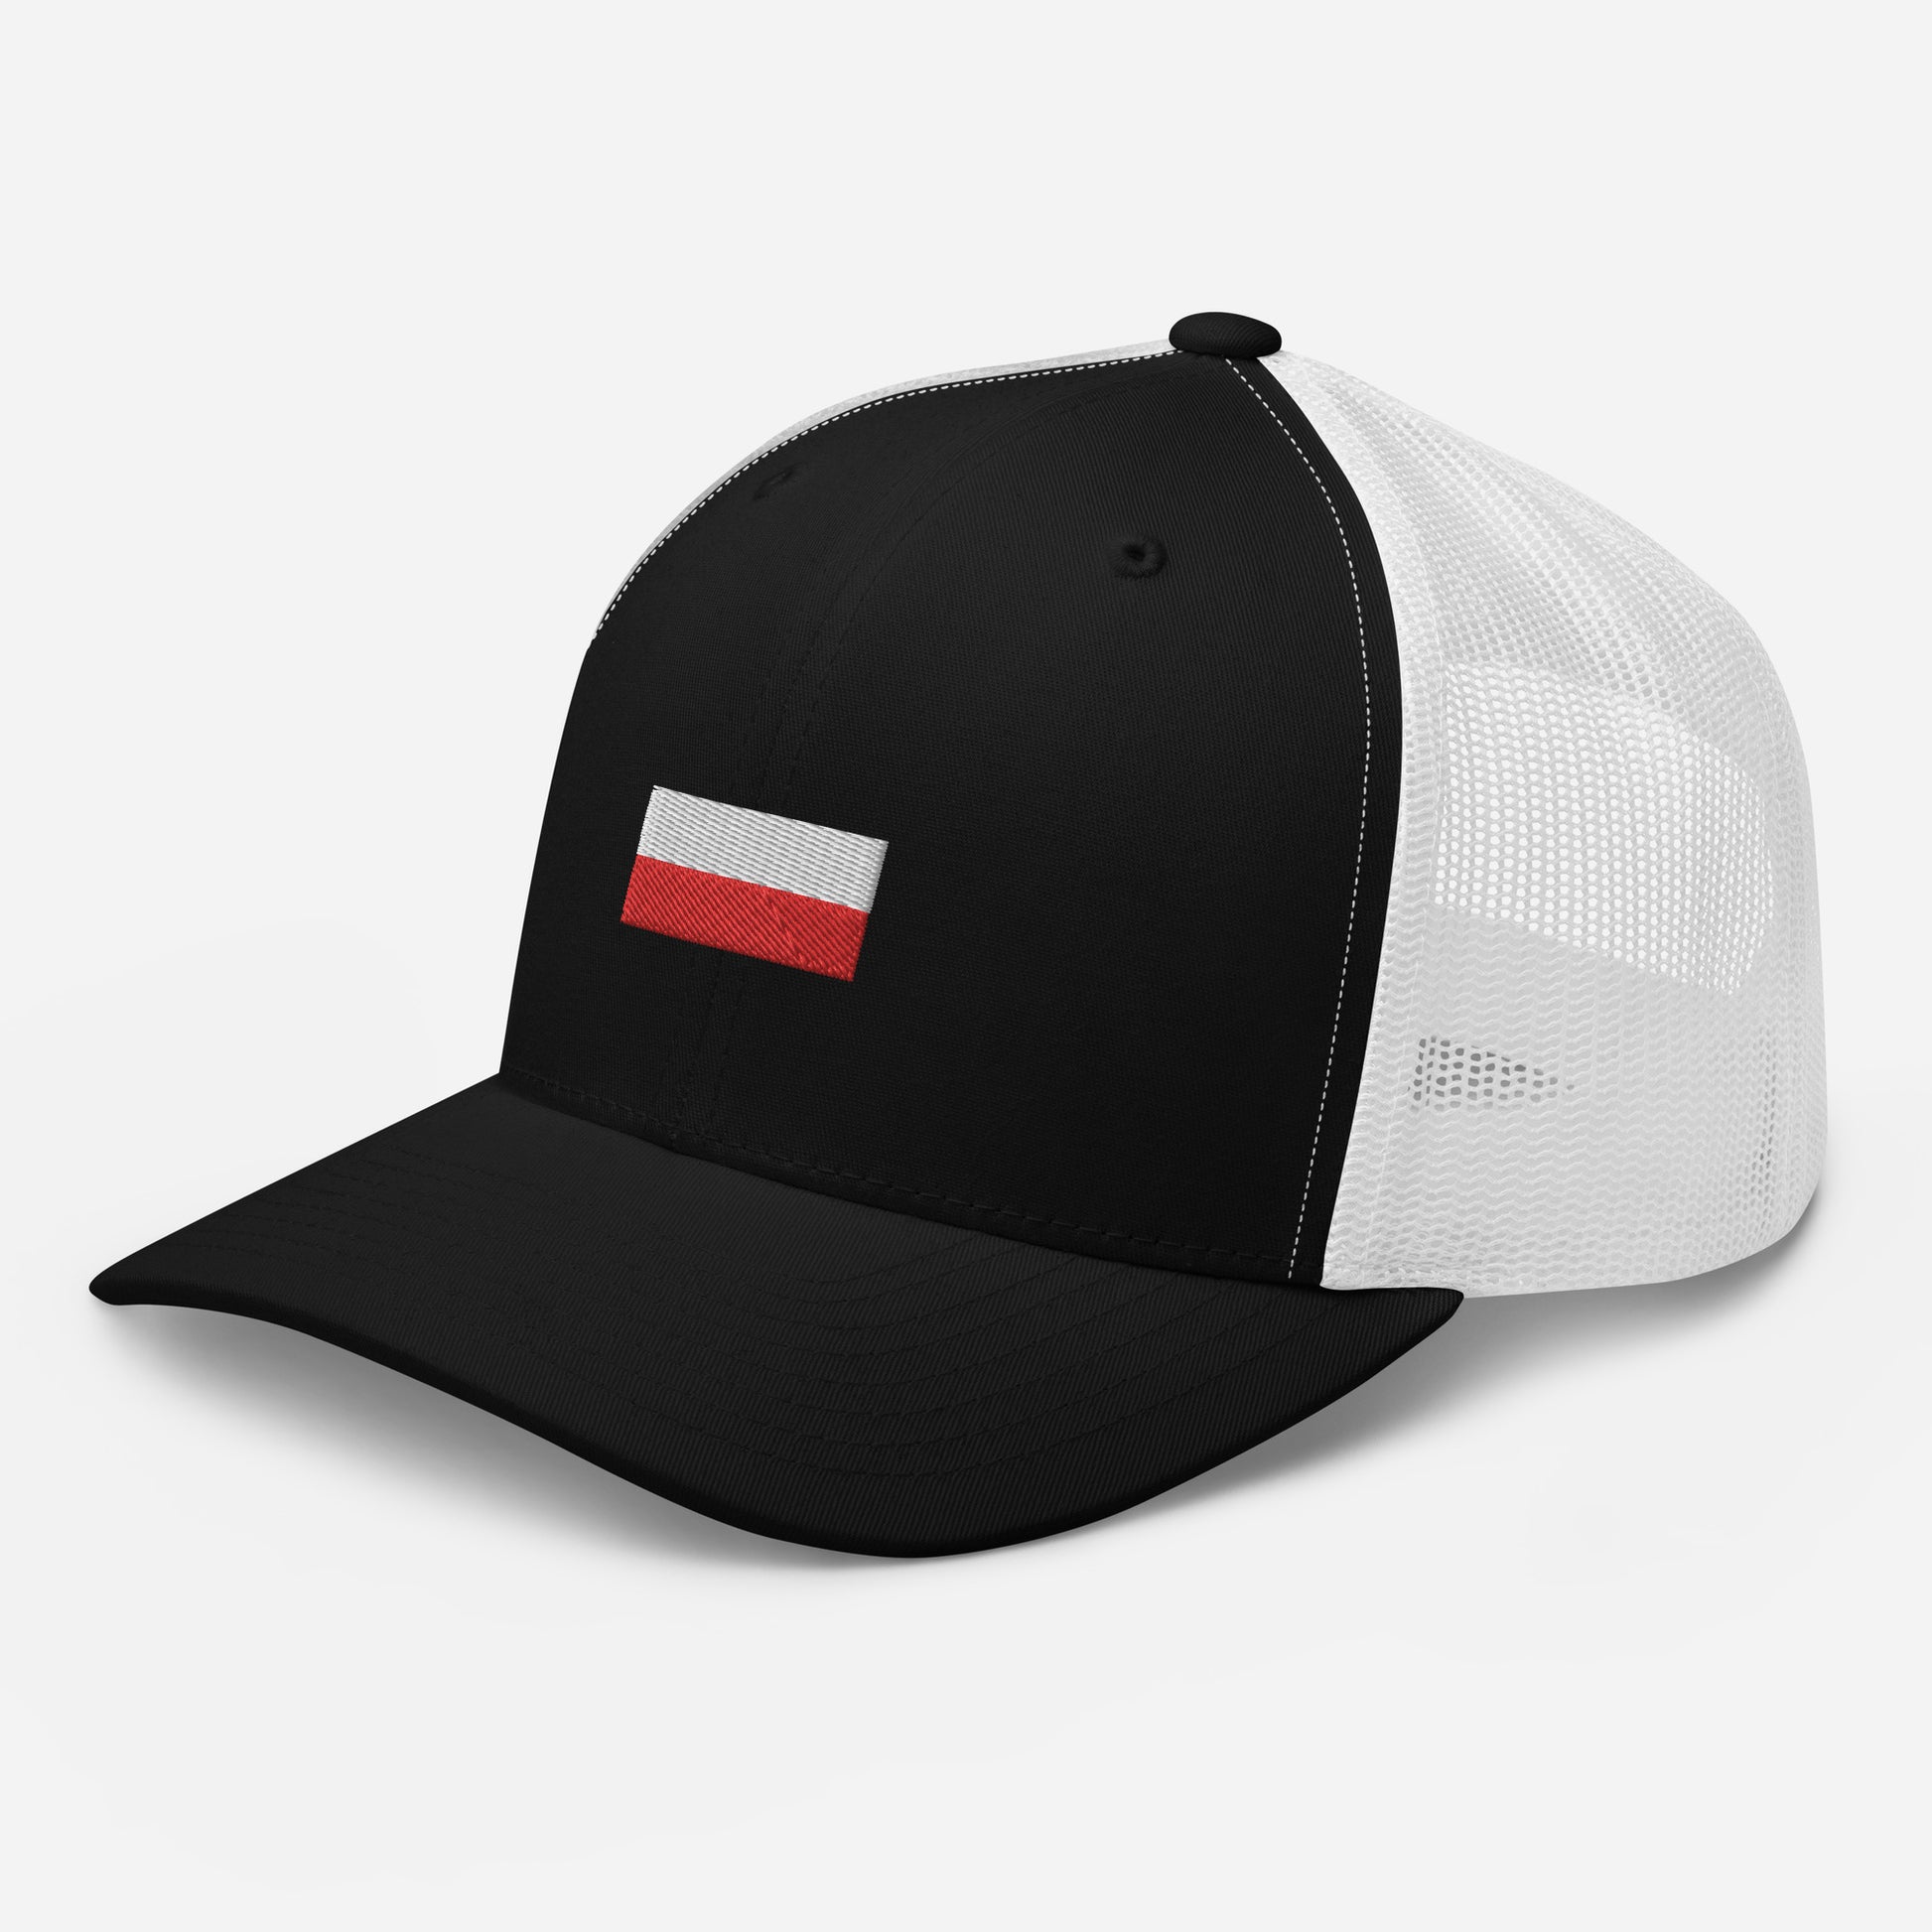 cap-from-the-front-with-polish-flag